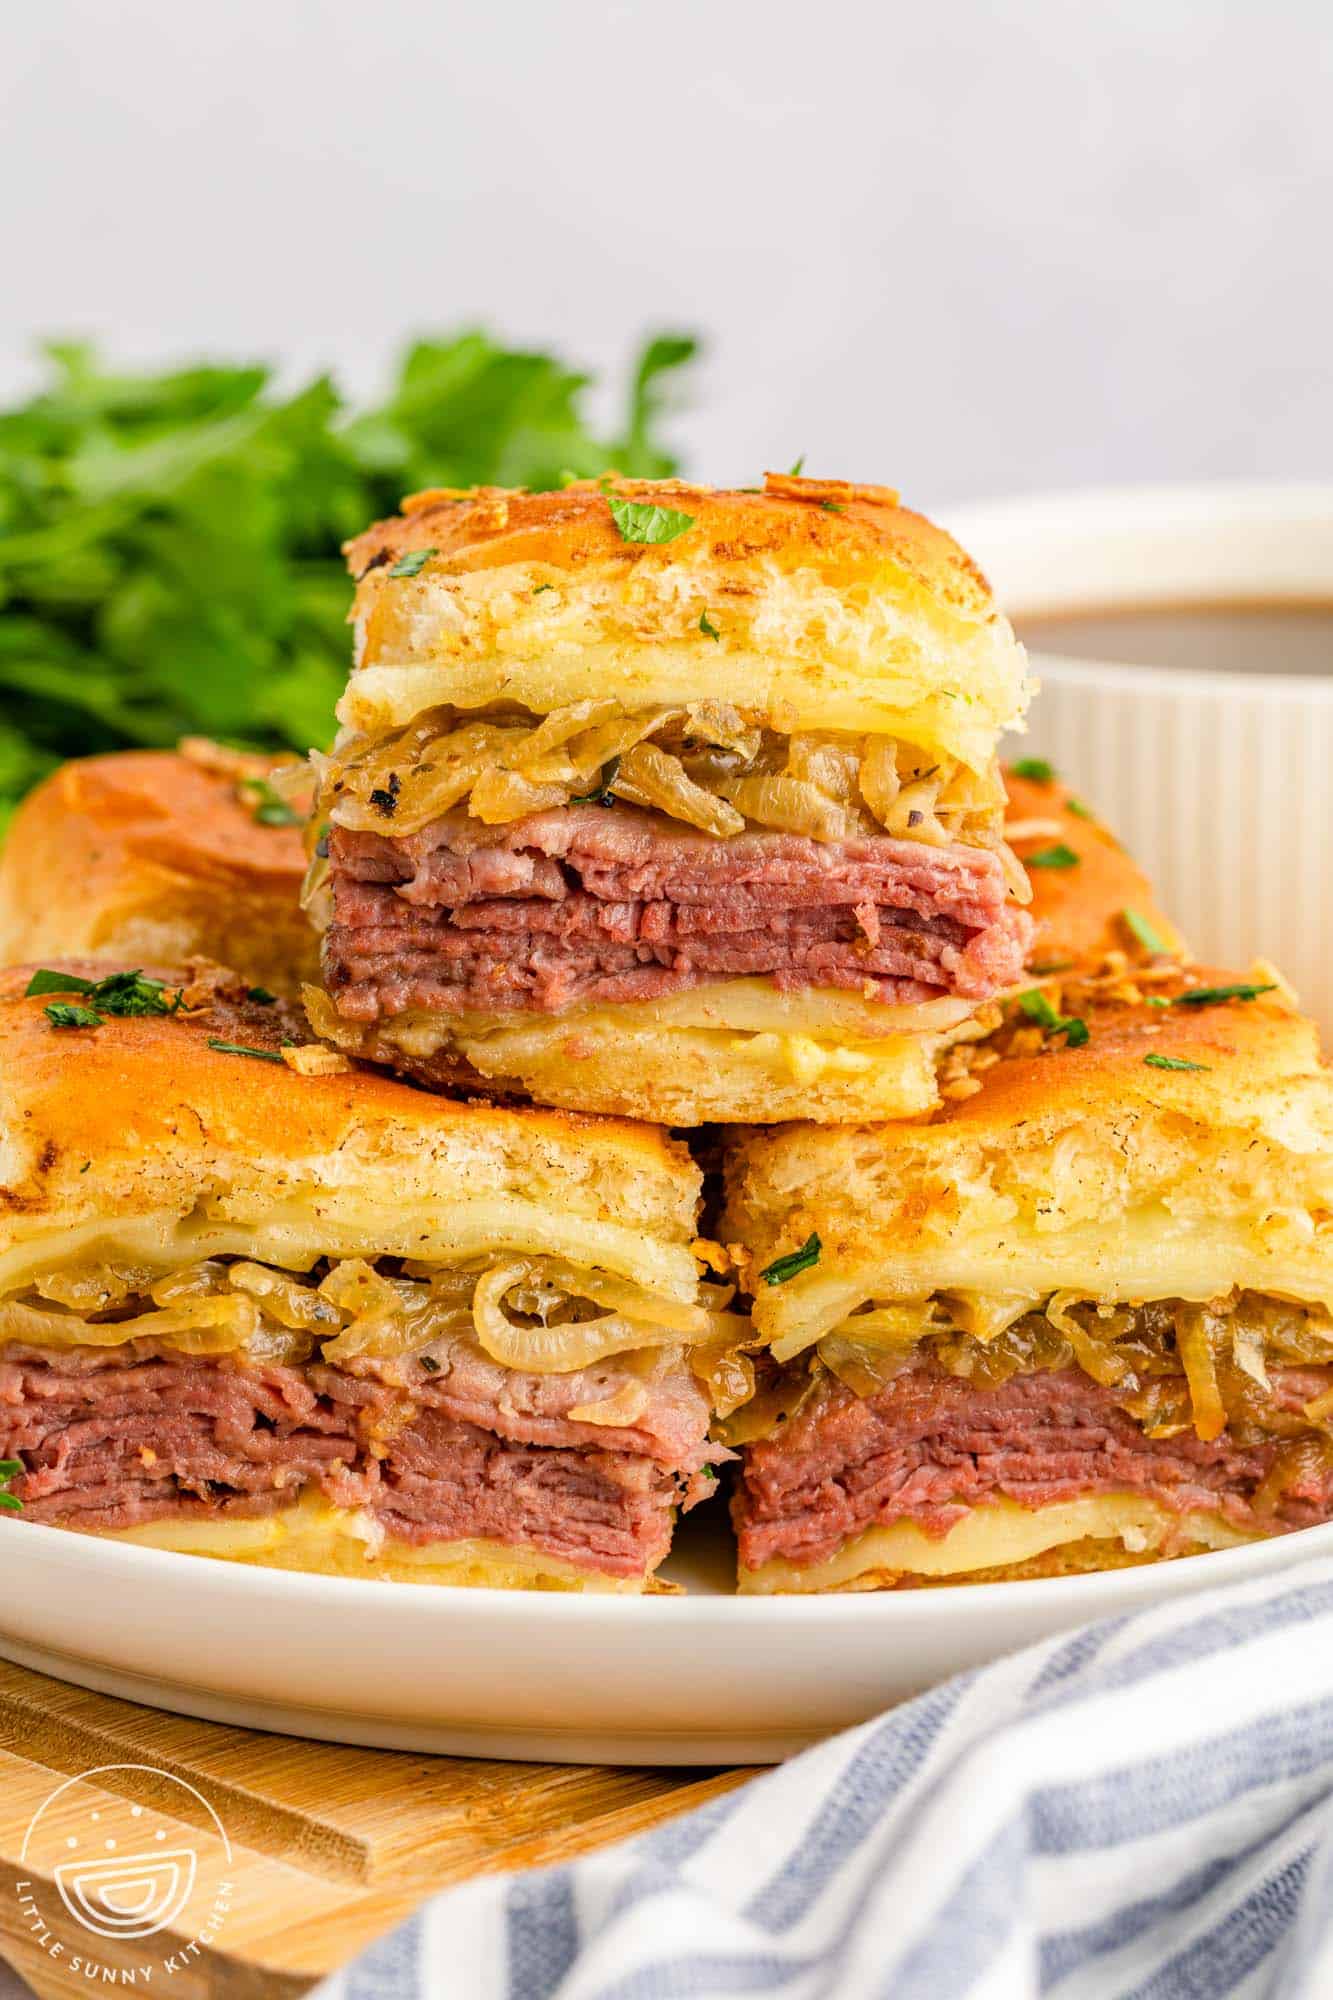 a plate filled with small french dip sandwiches. One sandwich is on top of the others.